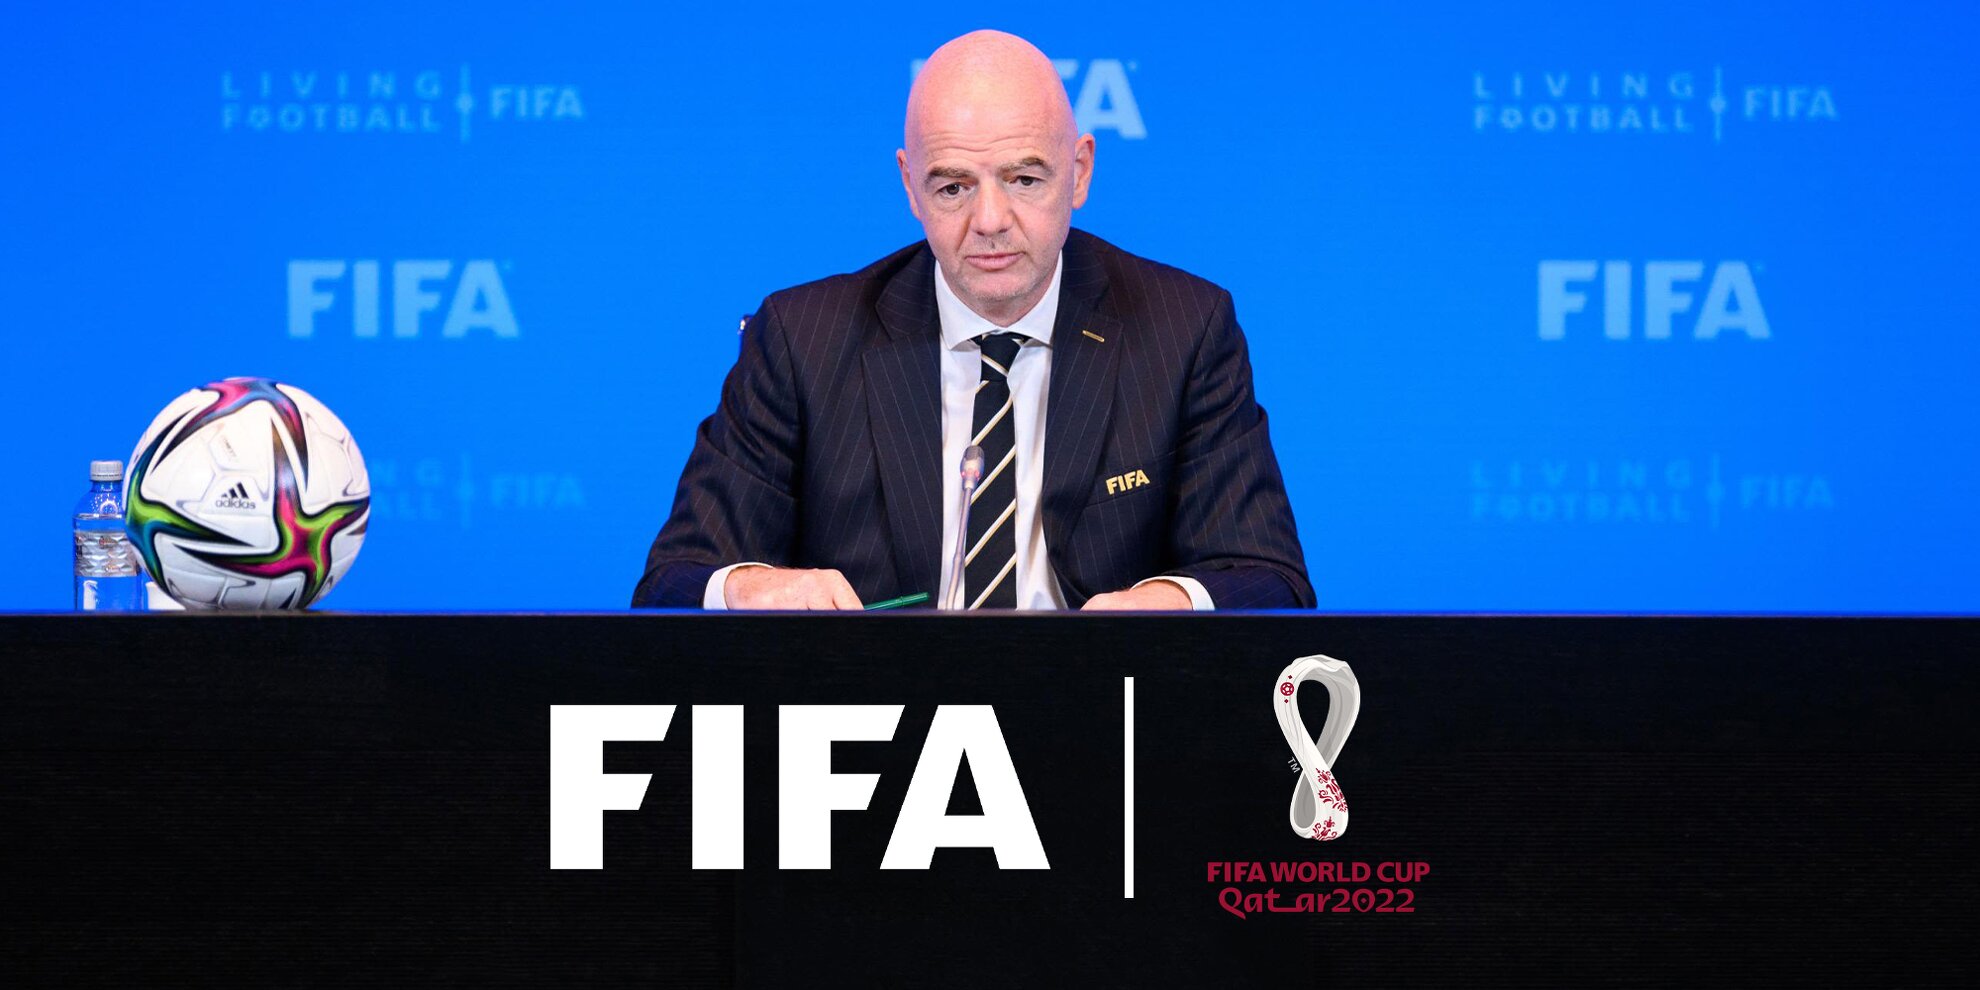 FIFA urges nations to 'focus on football rather than politics' during the 2022 Qatar World Cup